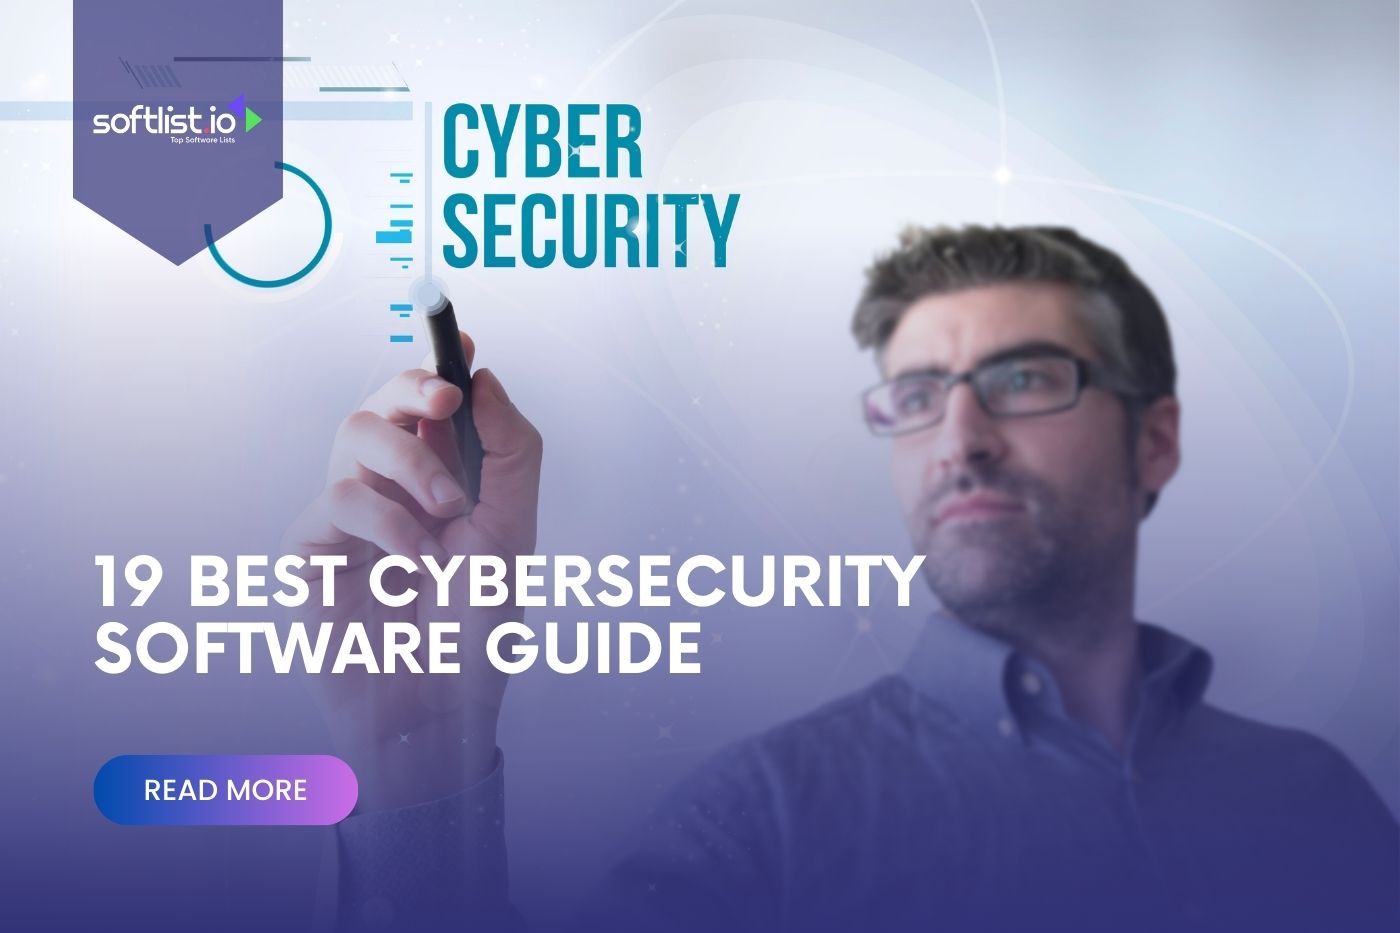 19 Best Cybersecurity Software Guide